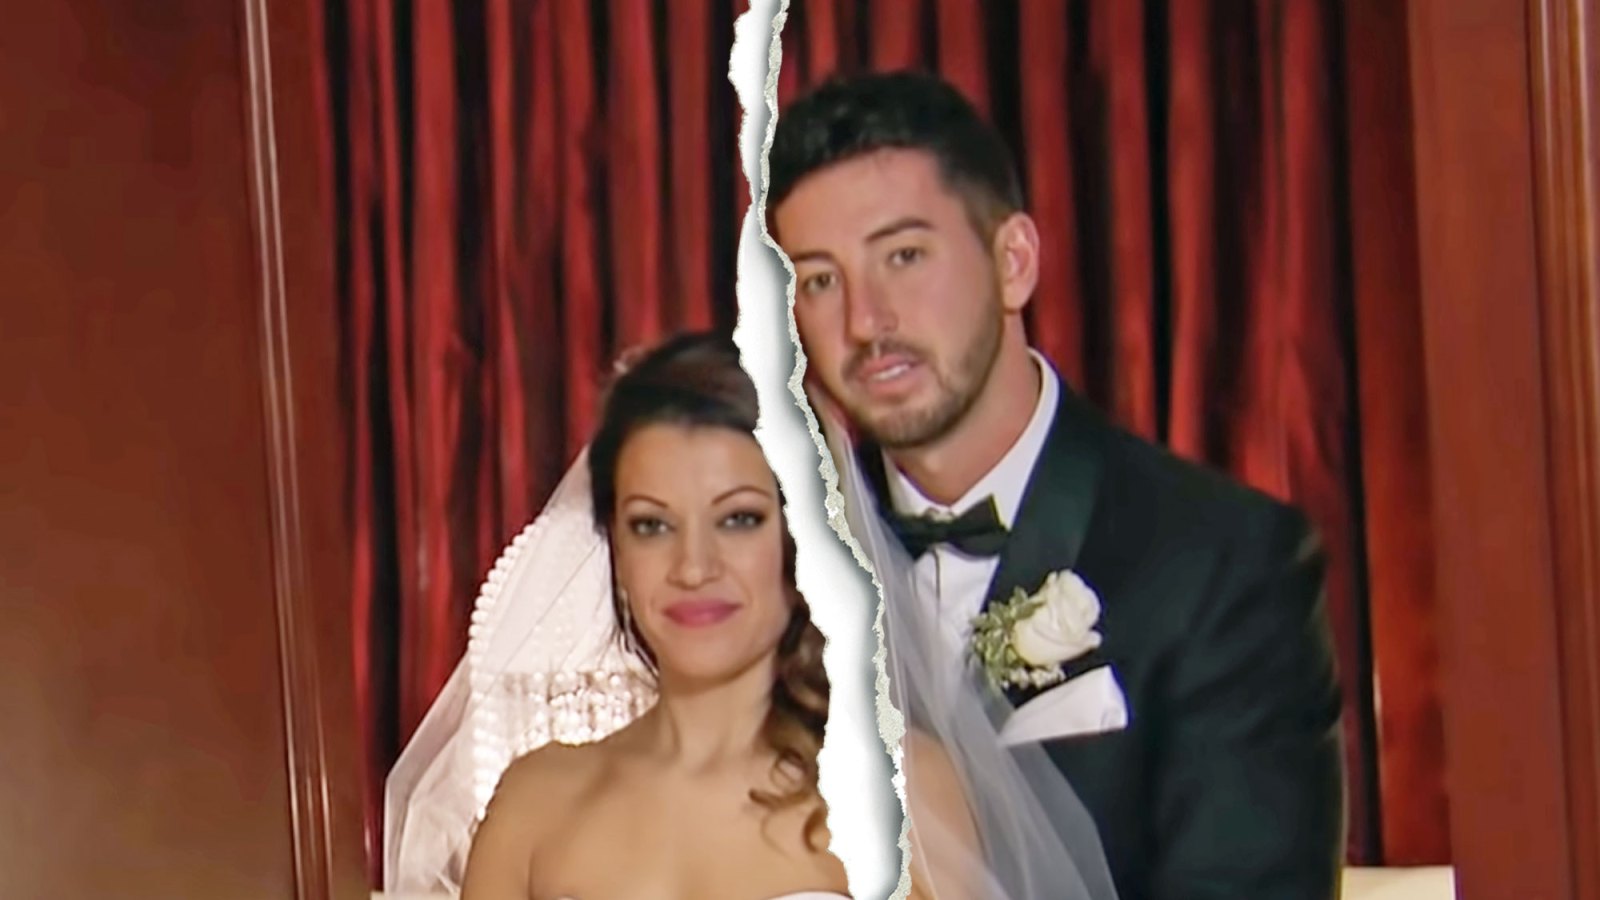 Married-at-First-Sights-Jaclyn-Methuen-Ryan-Ranellone-Split-for-Good-Jaclyn-Metheun-and-Ryan-Ranellone